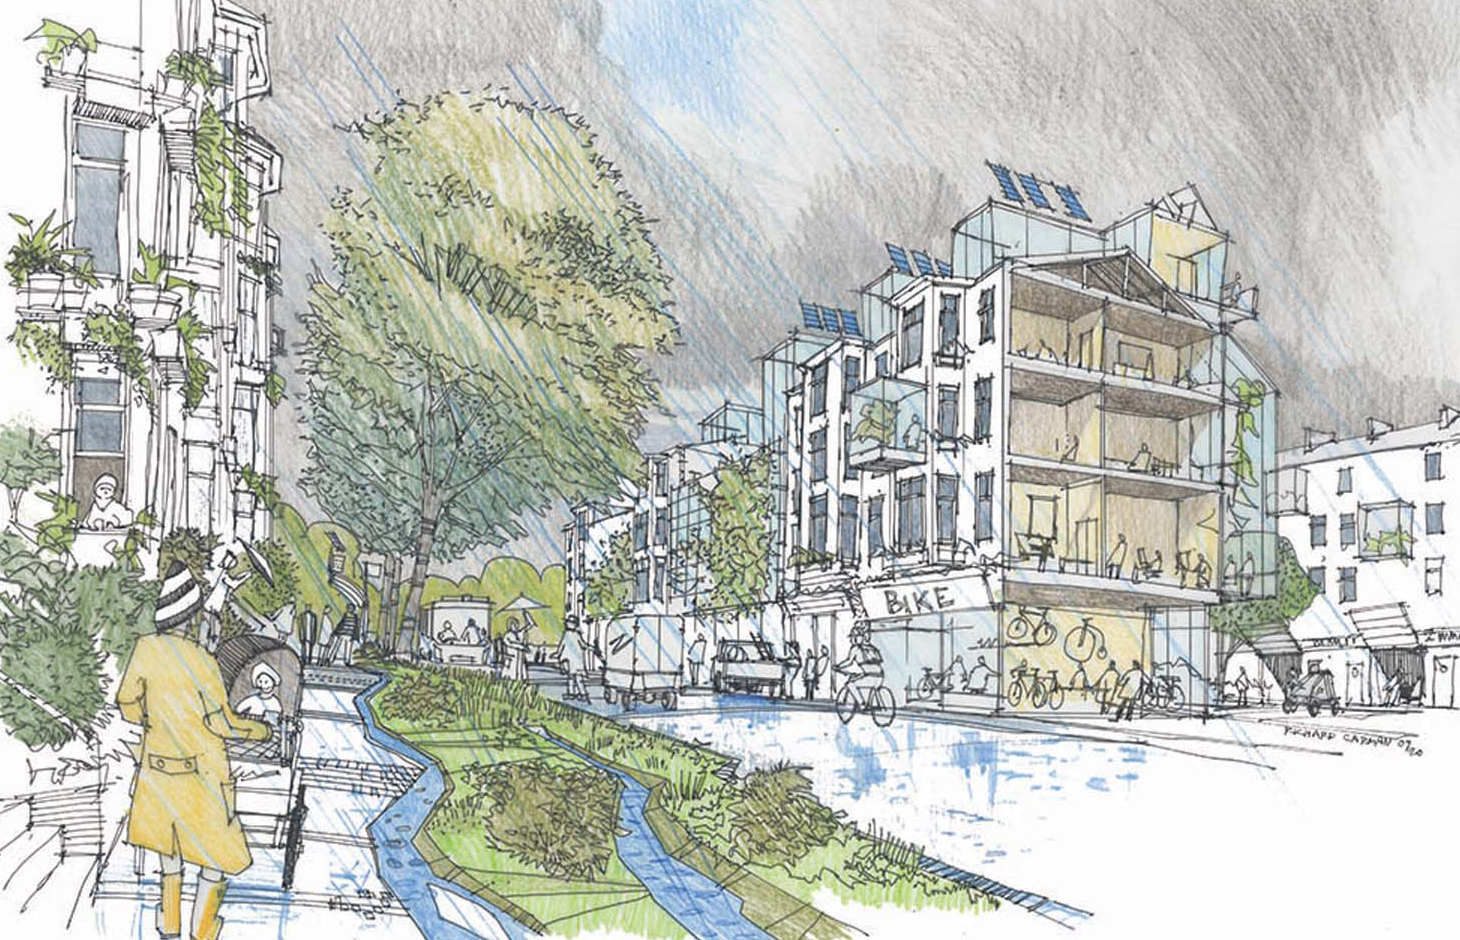 An architectural sketch of a high street and housing in a town centre with trees, grass and water running alongside it.